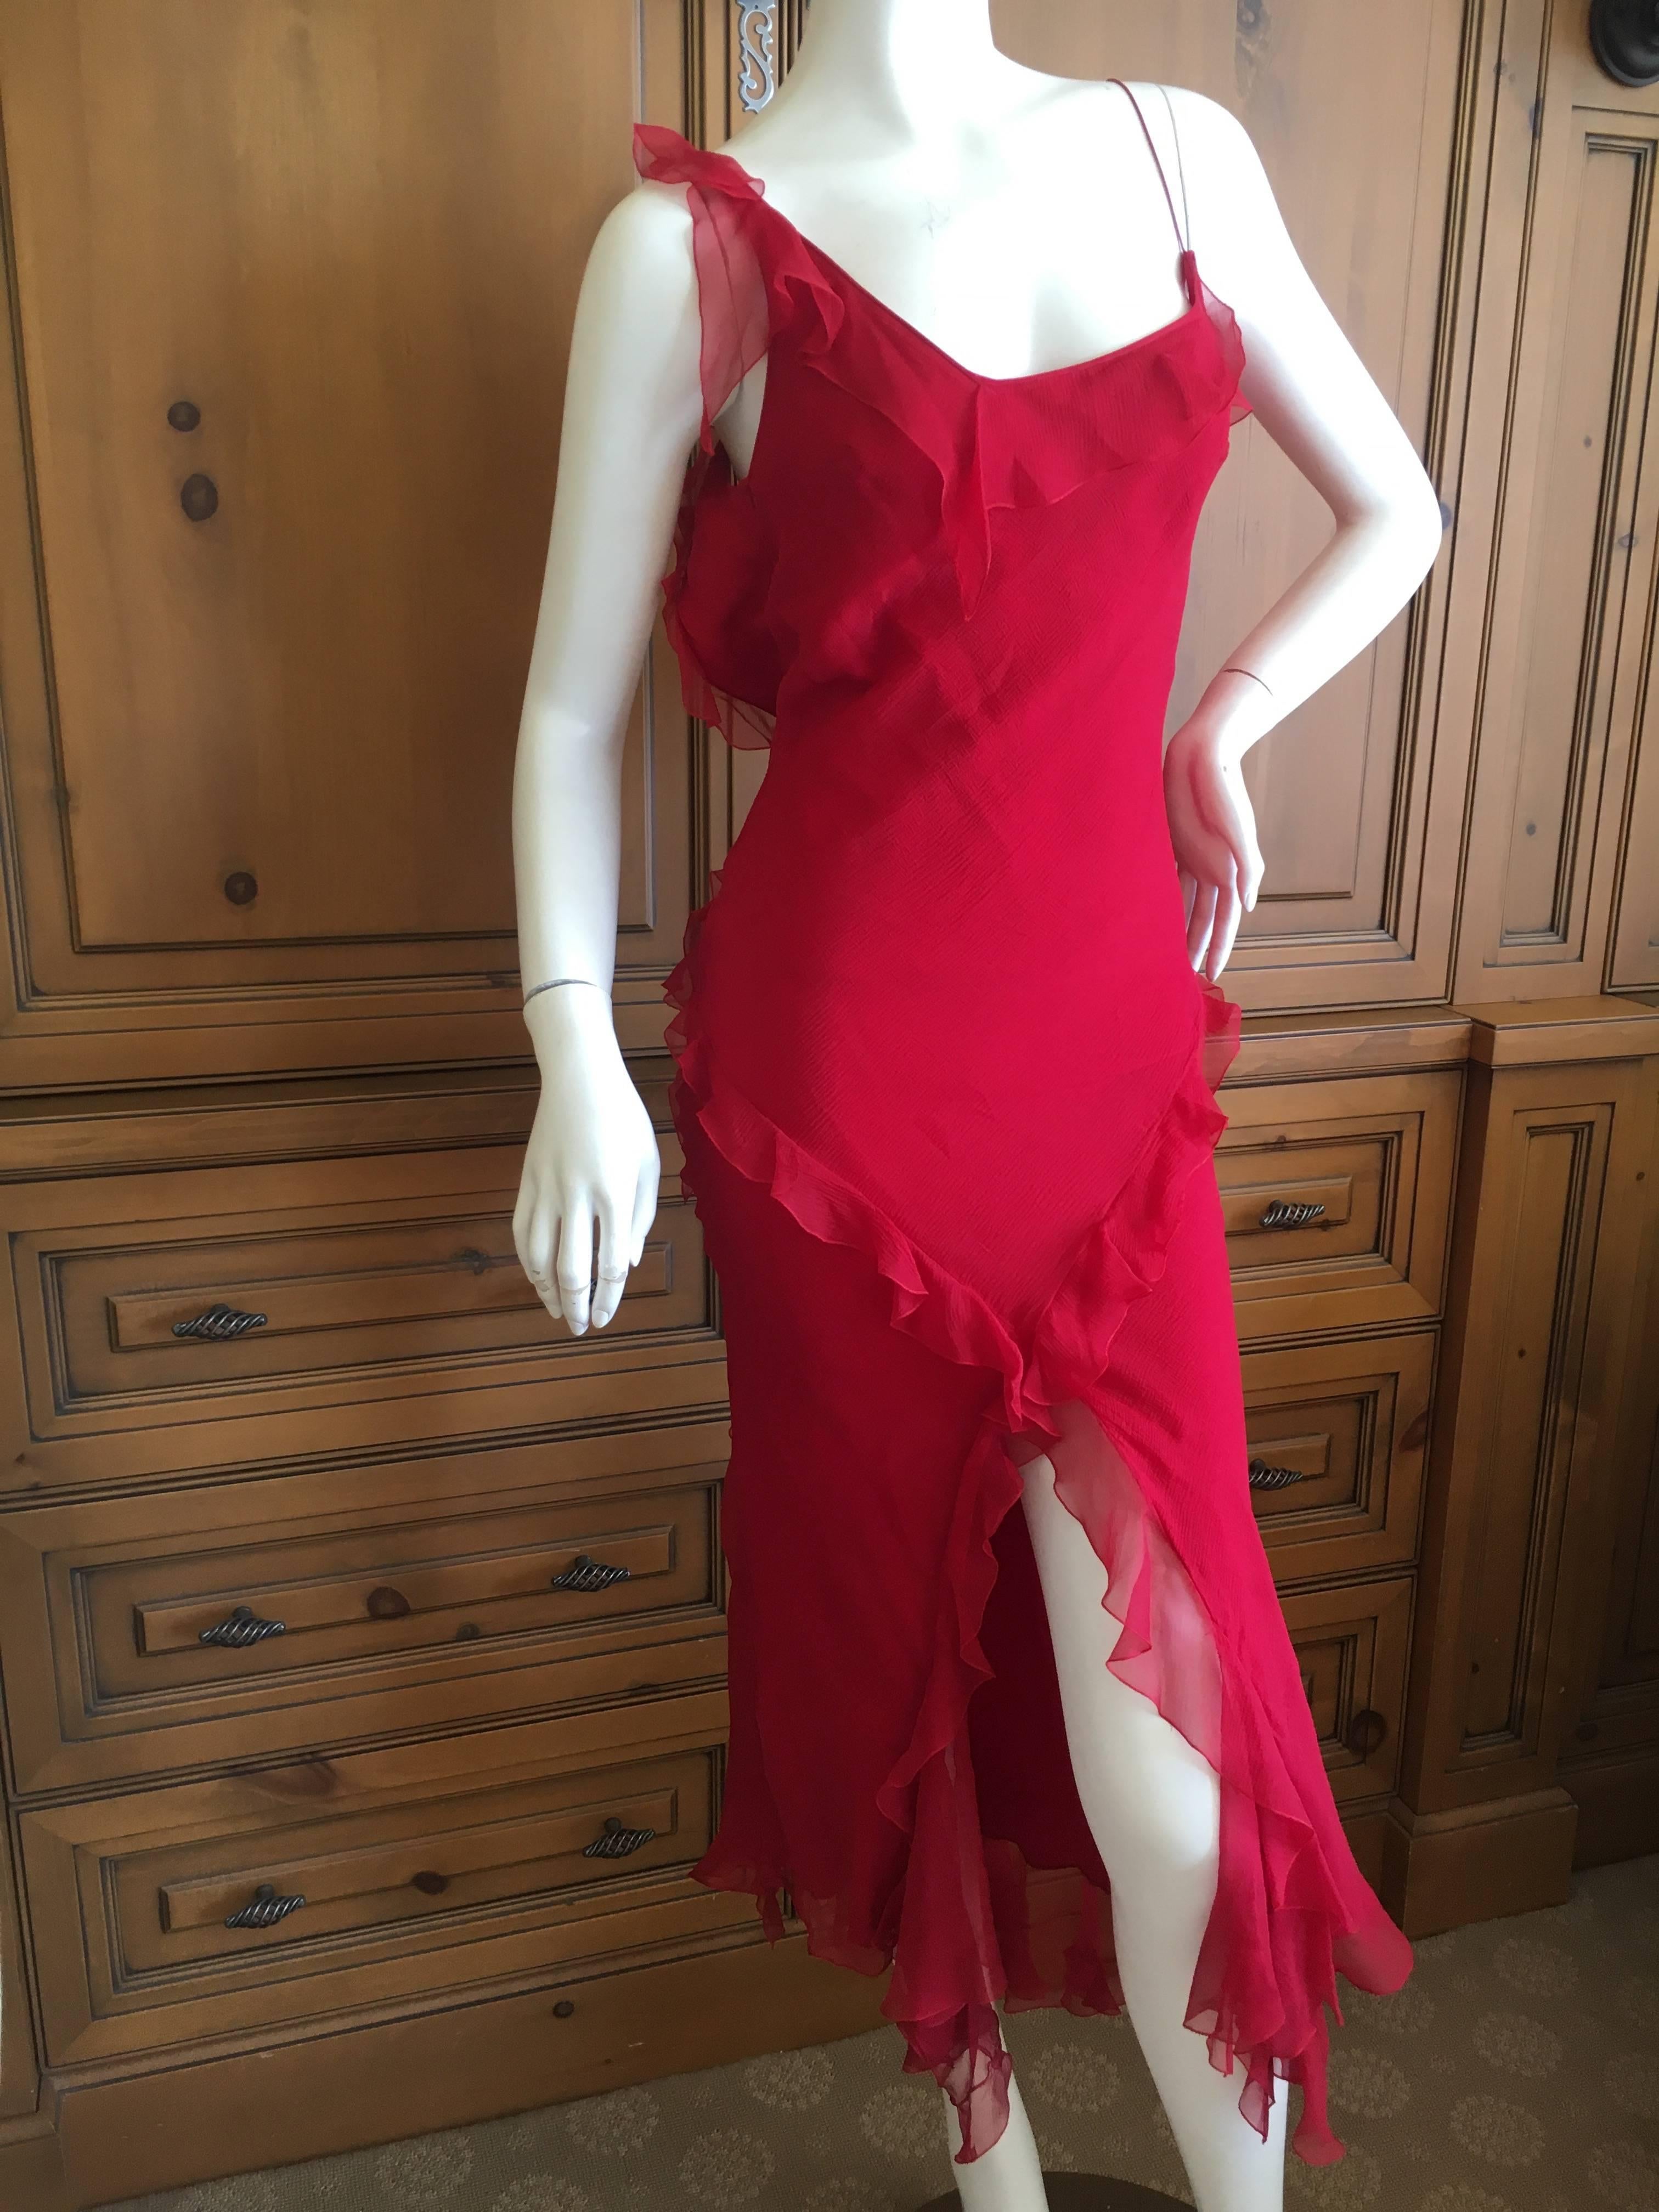 Christian Dior by John Galliano Ruffled Red Silk Dress In Excellent Condition For Sale In Cloverdale, CA